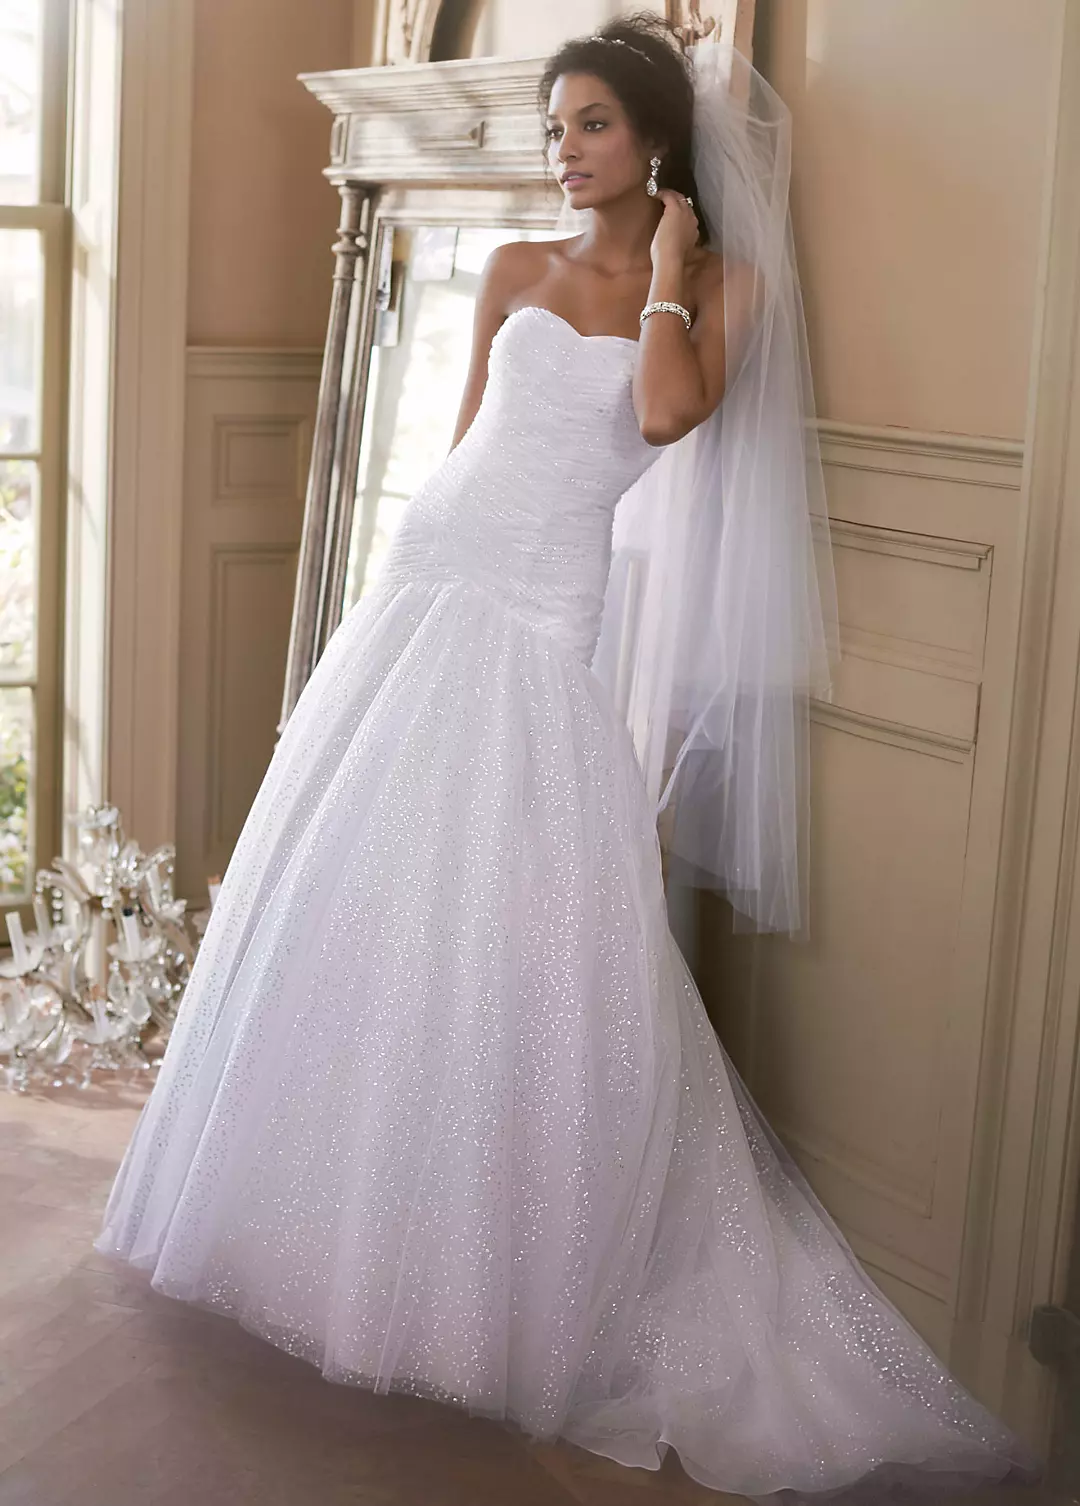 Sweetheart Sequin Tulle Ball Gown with Corset Back Image